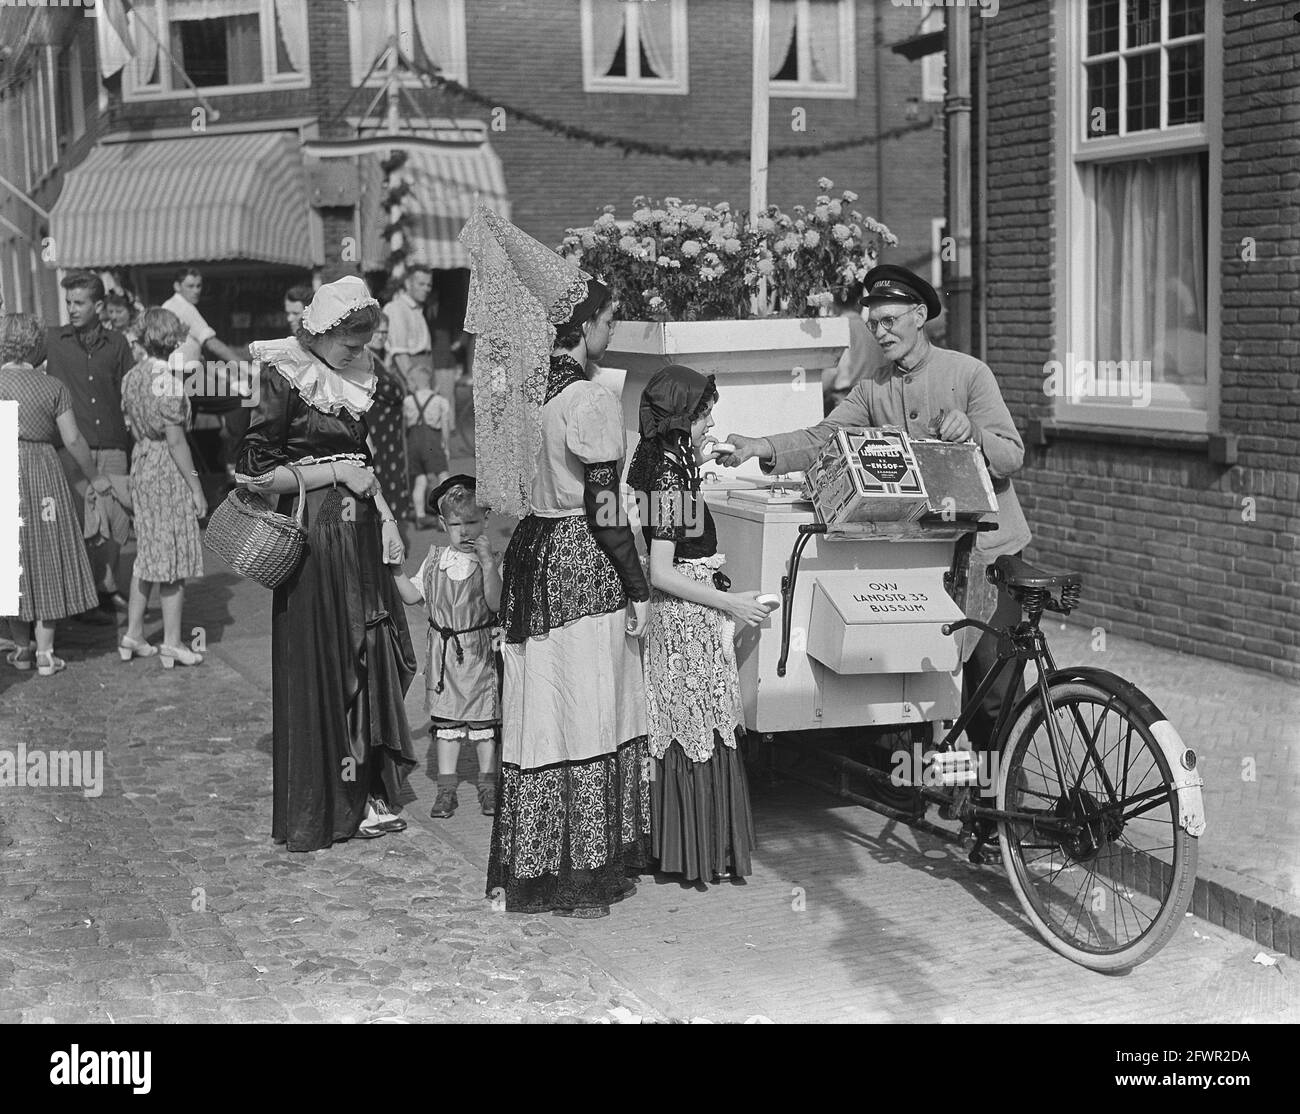 Naarden 600 years, August 21 1950, icecream men, The Netherlands, 20th century press agency photo, news to remember, documentary, historic photography 1945-1990, visual stories, human history of the Twentieth Century, capturing moments in time Stock Photo